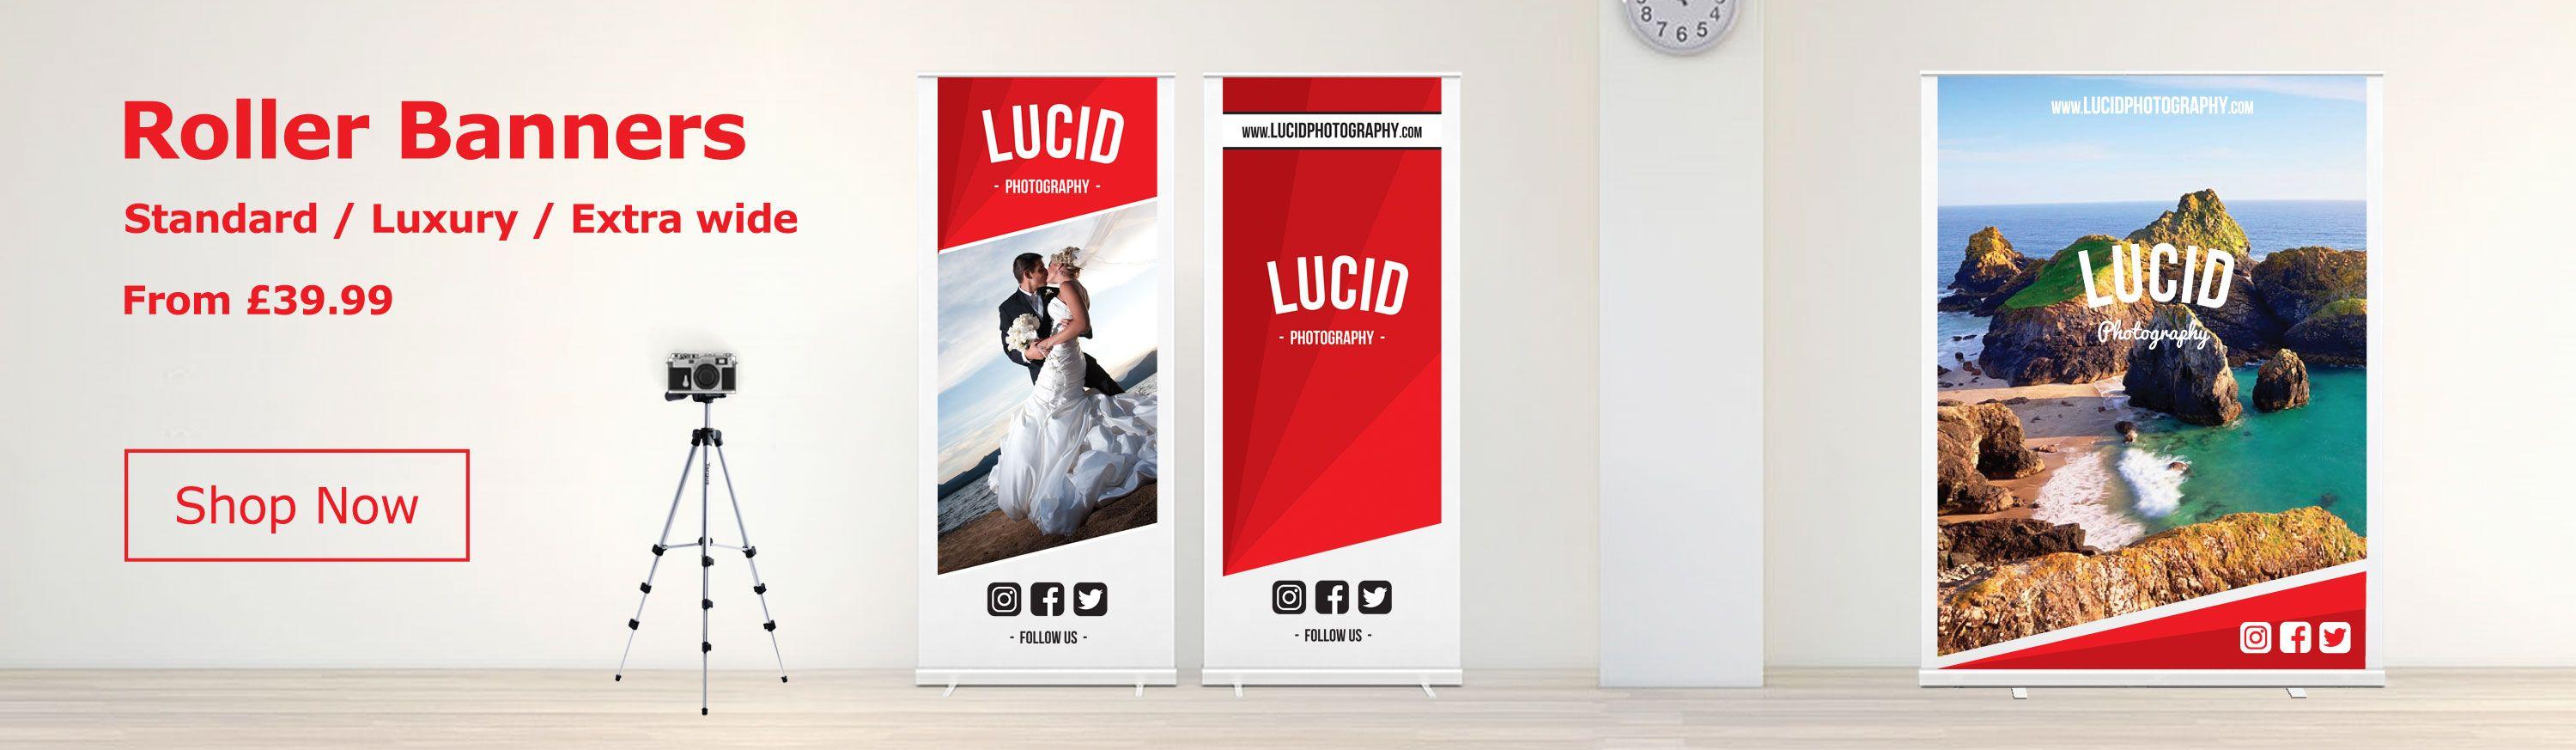 Printing Banners Logo - BrunelOne.com. Business Cards, Flyers, Roller Banners, Notepads